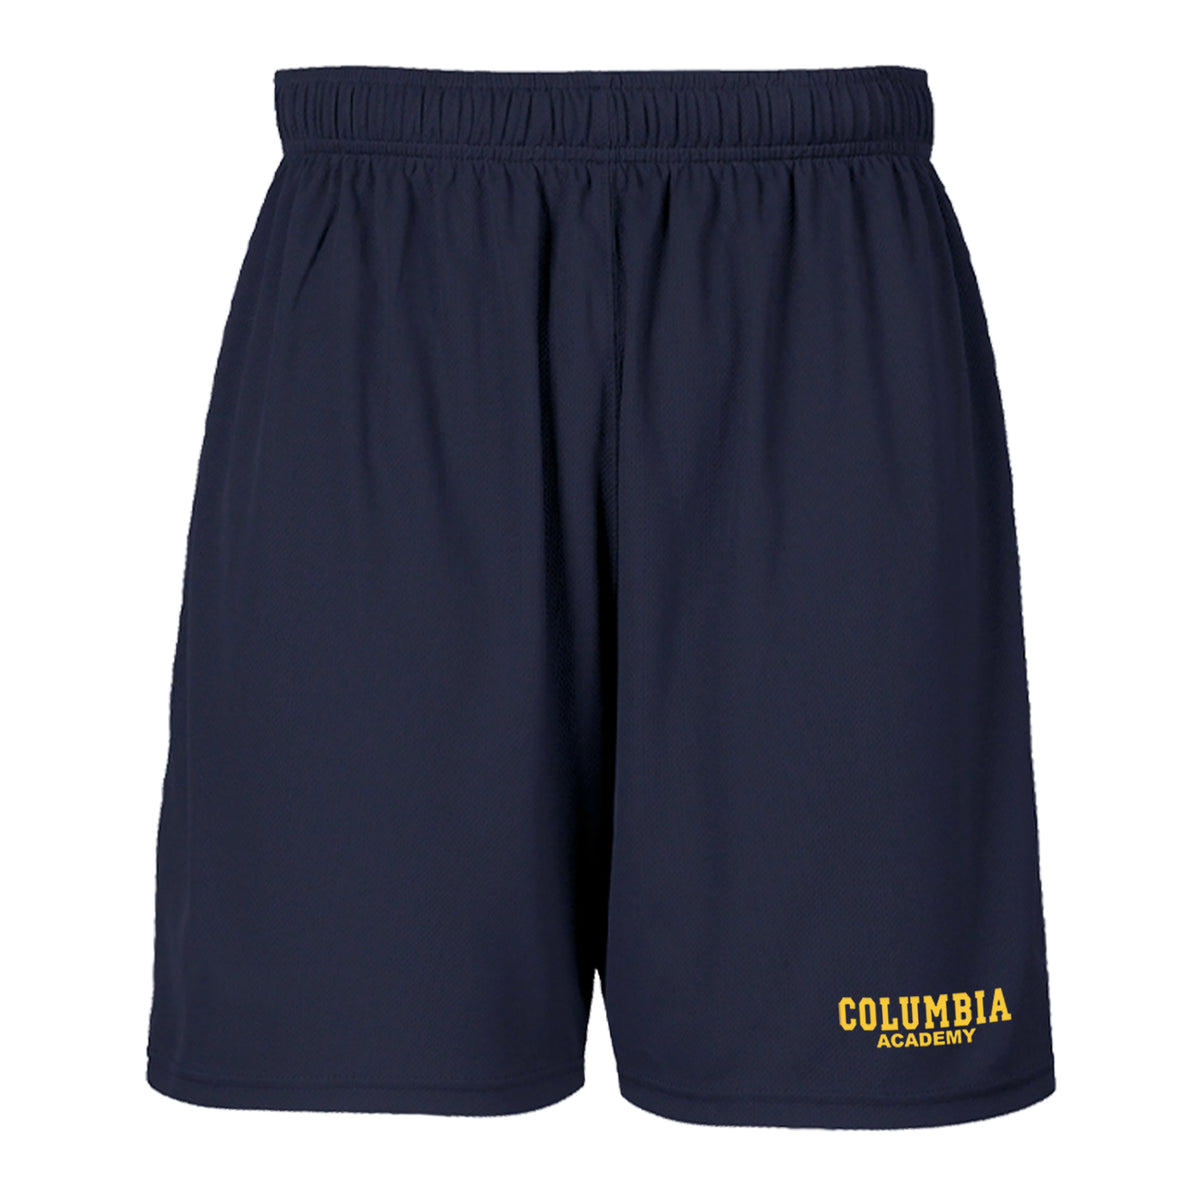 COLUMBIA ACADEMY GYM SHORTS, WICKING, YOUTH